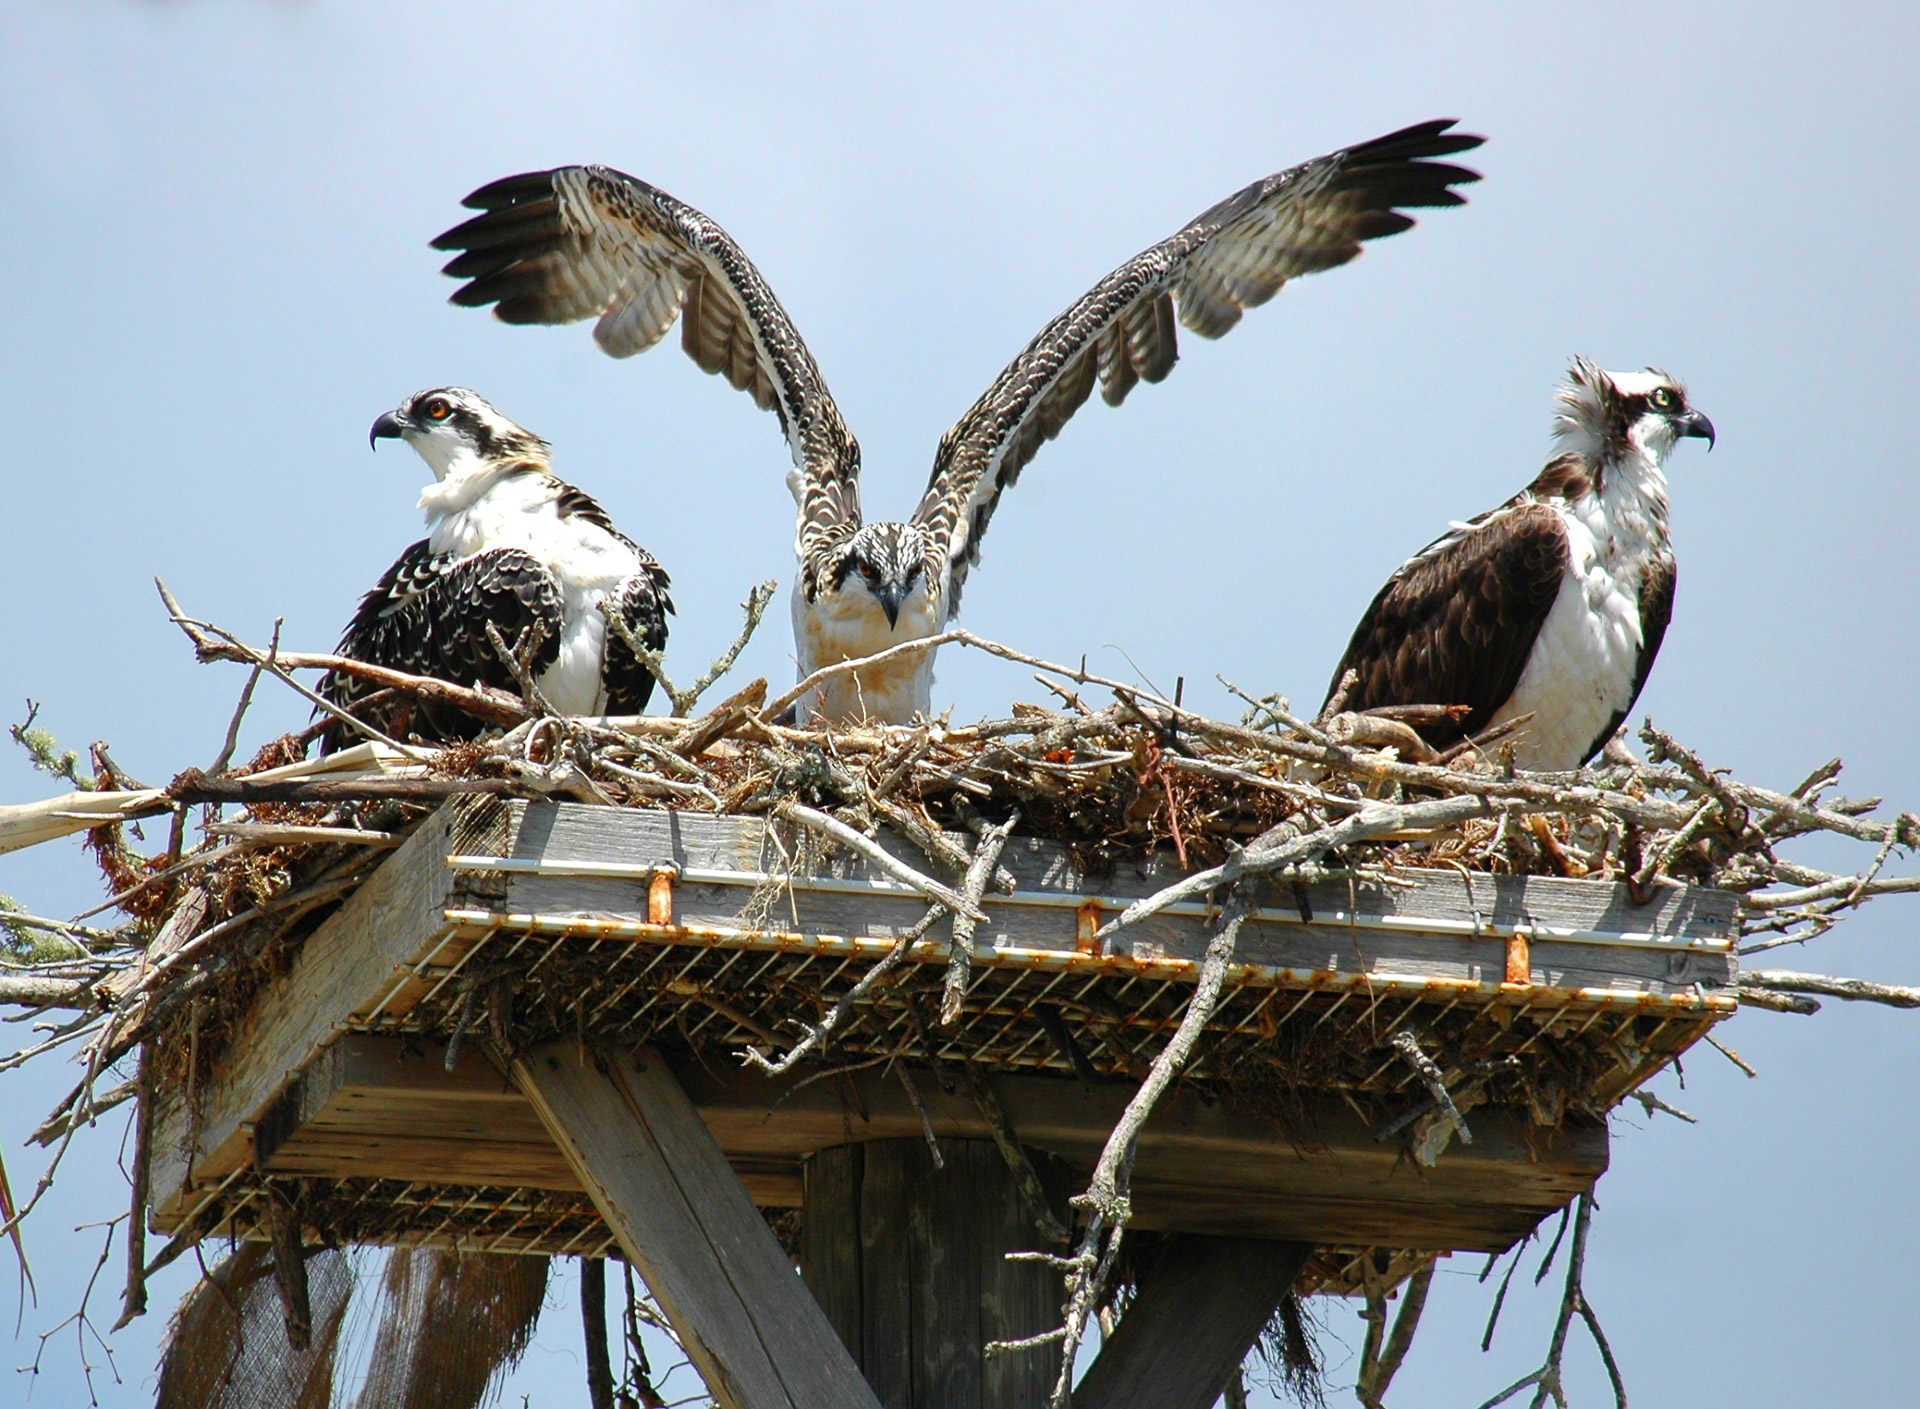 Two young Ospreys with their mother in their nest. Photographed in Florida.